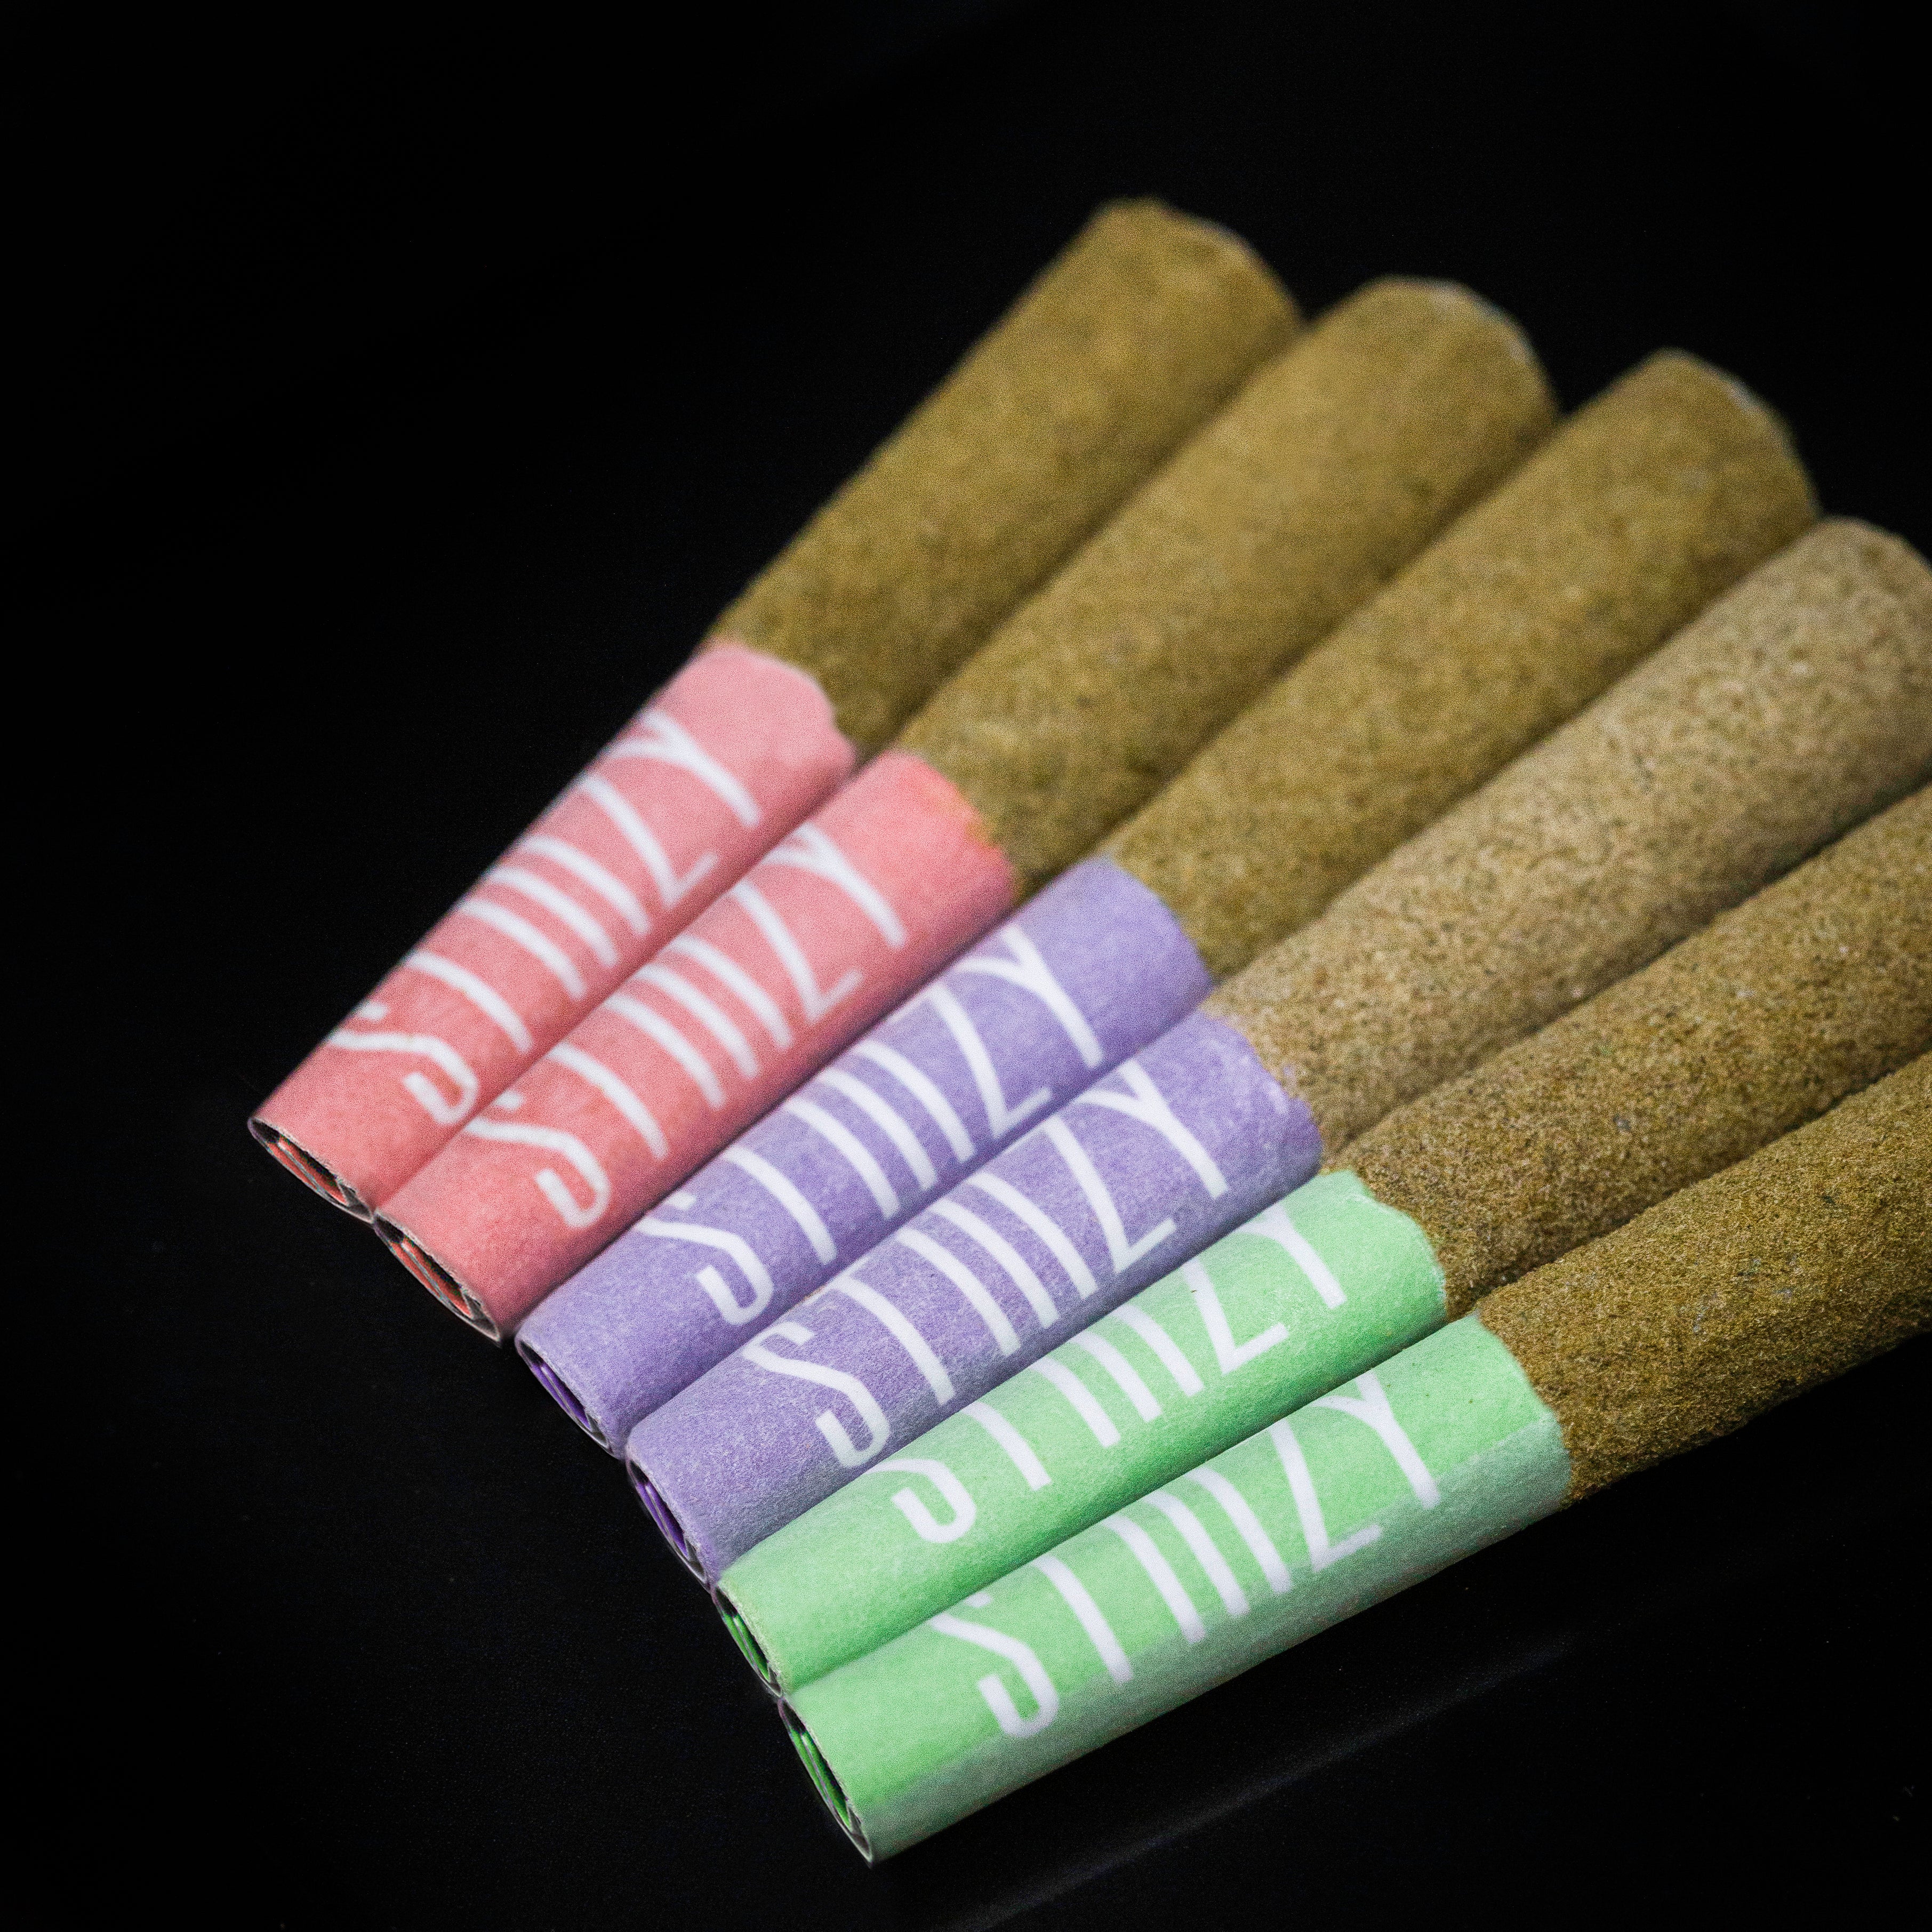 6 STIIIZY infused cannabis pre-rolls with green, purple, and pink filters lie on a black surface.